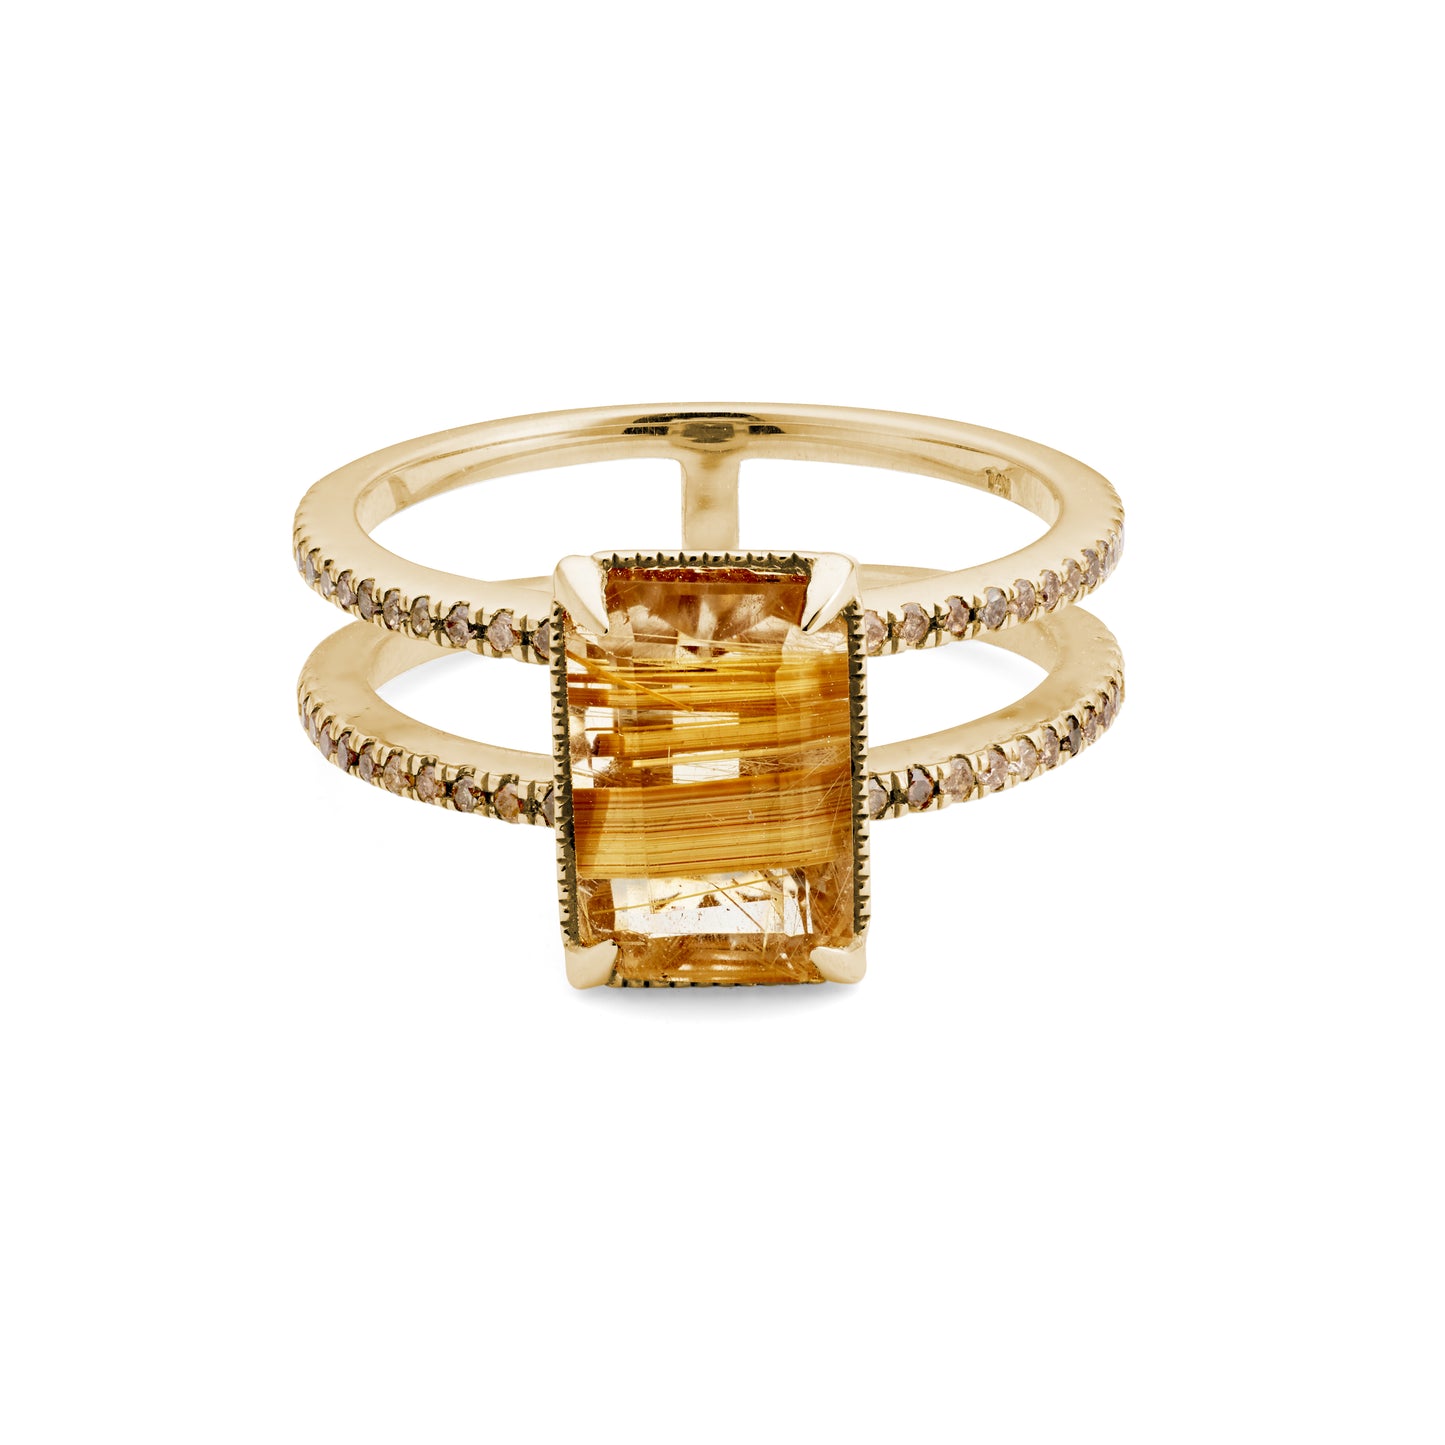 Load image into Gallery viewer, Double band Gisele ring with champagne diamonds and a gold rutile quartz on white background.
